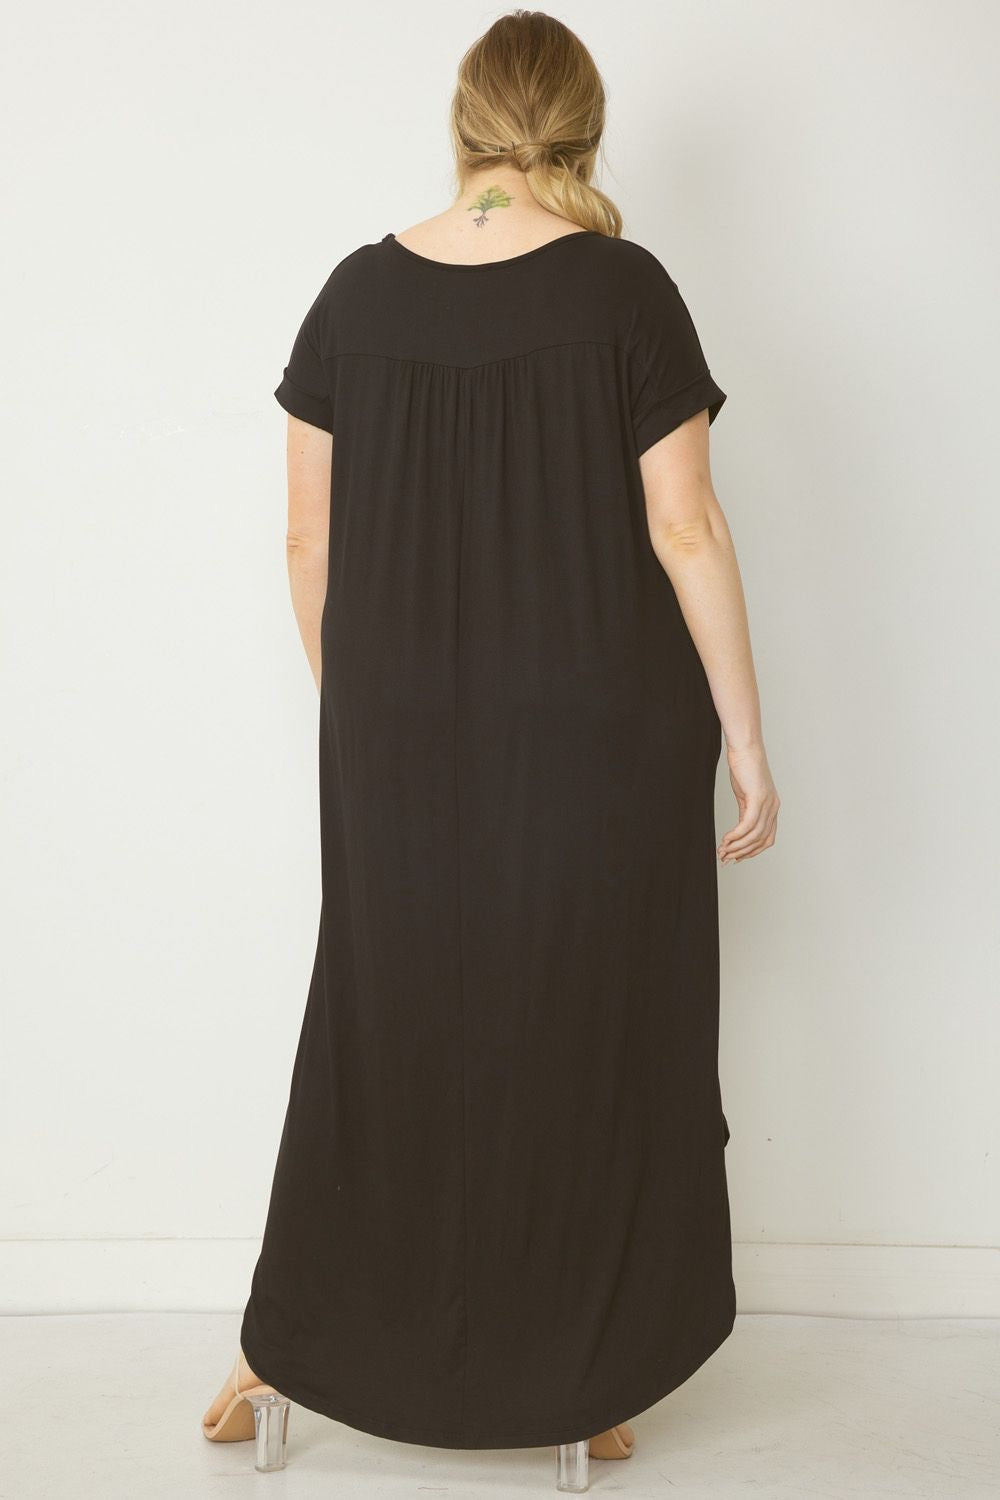 Jersey Knit Maxi Dress With Pockets & Rolled Sleeve Available in Small - 2XL